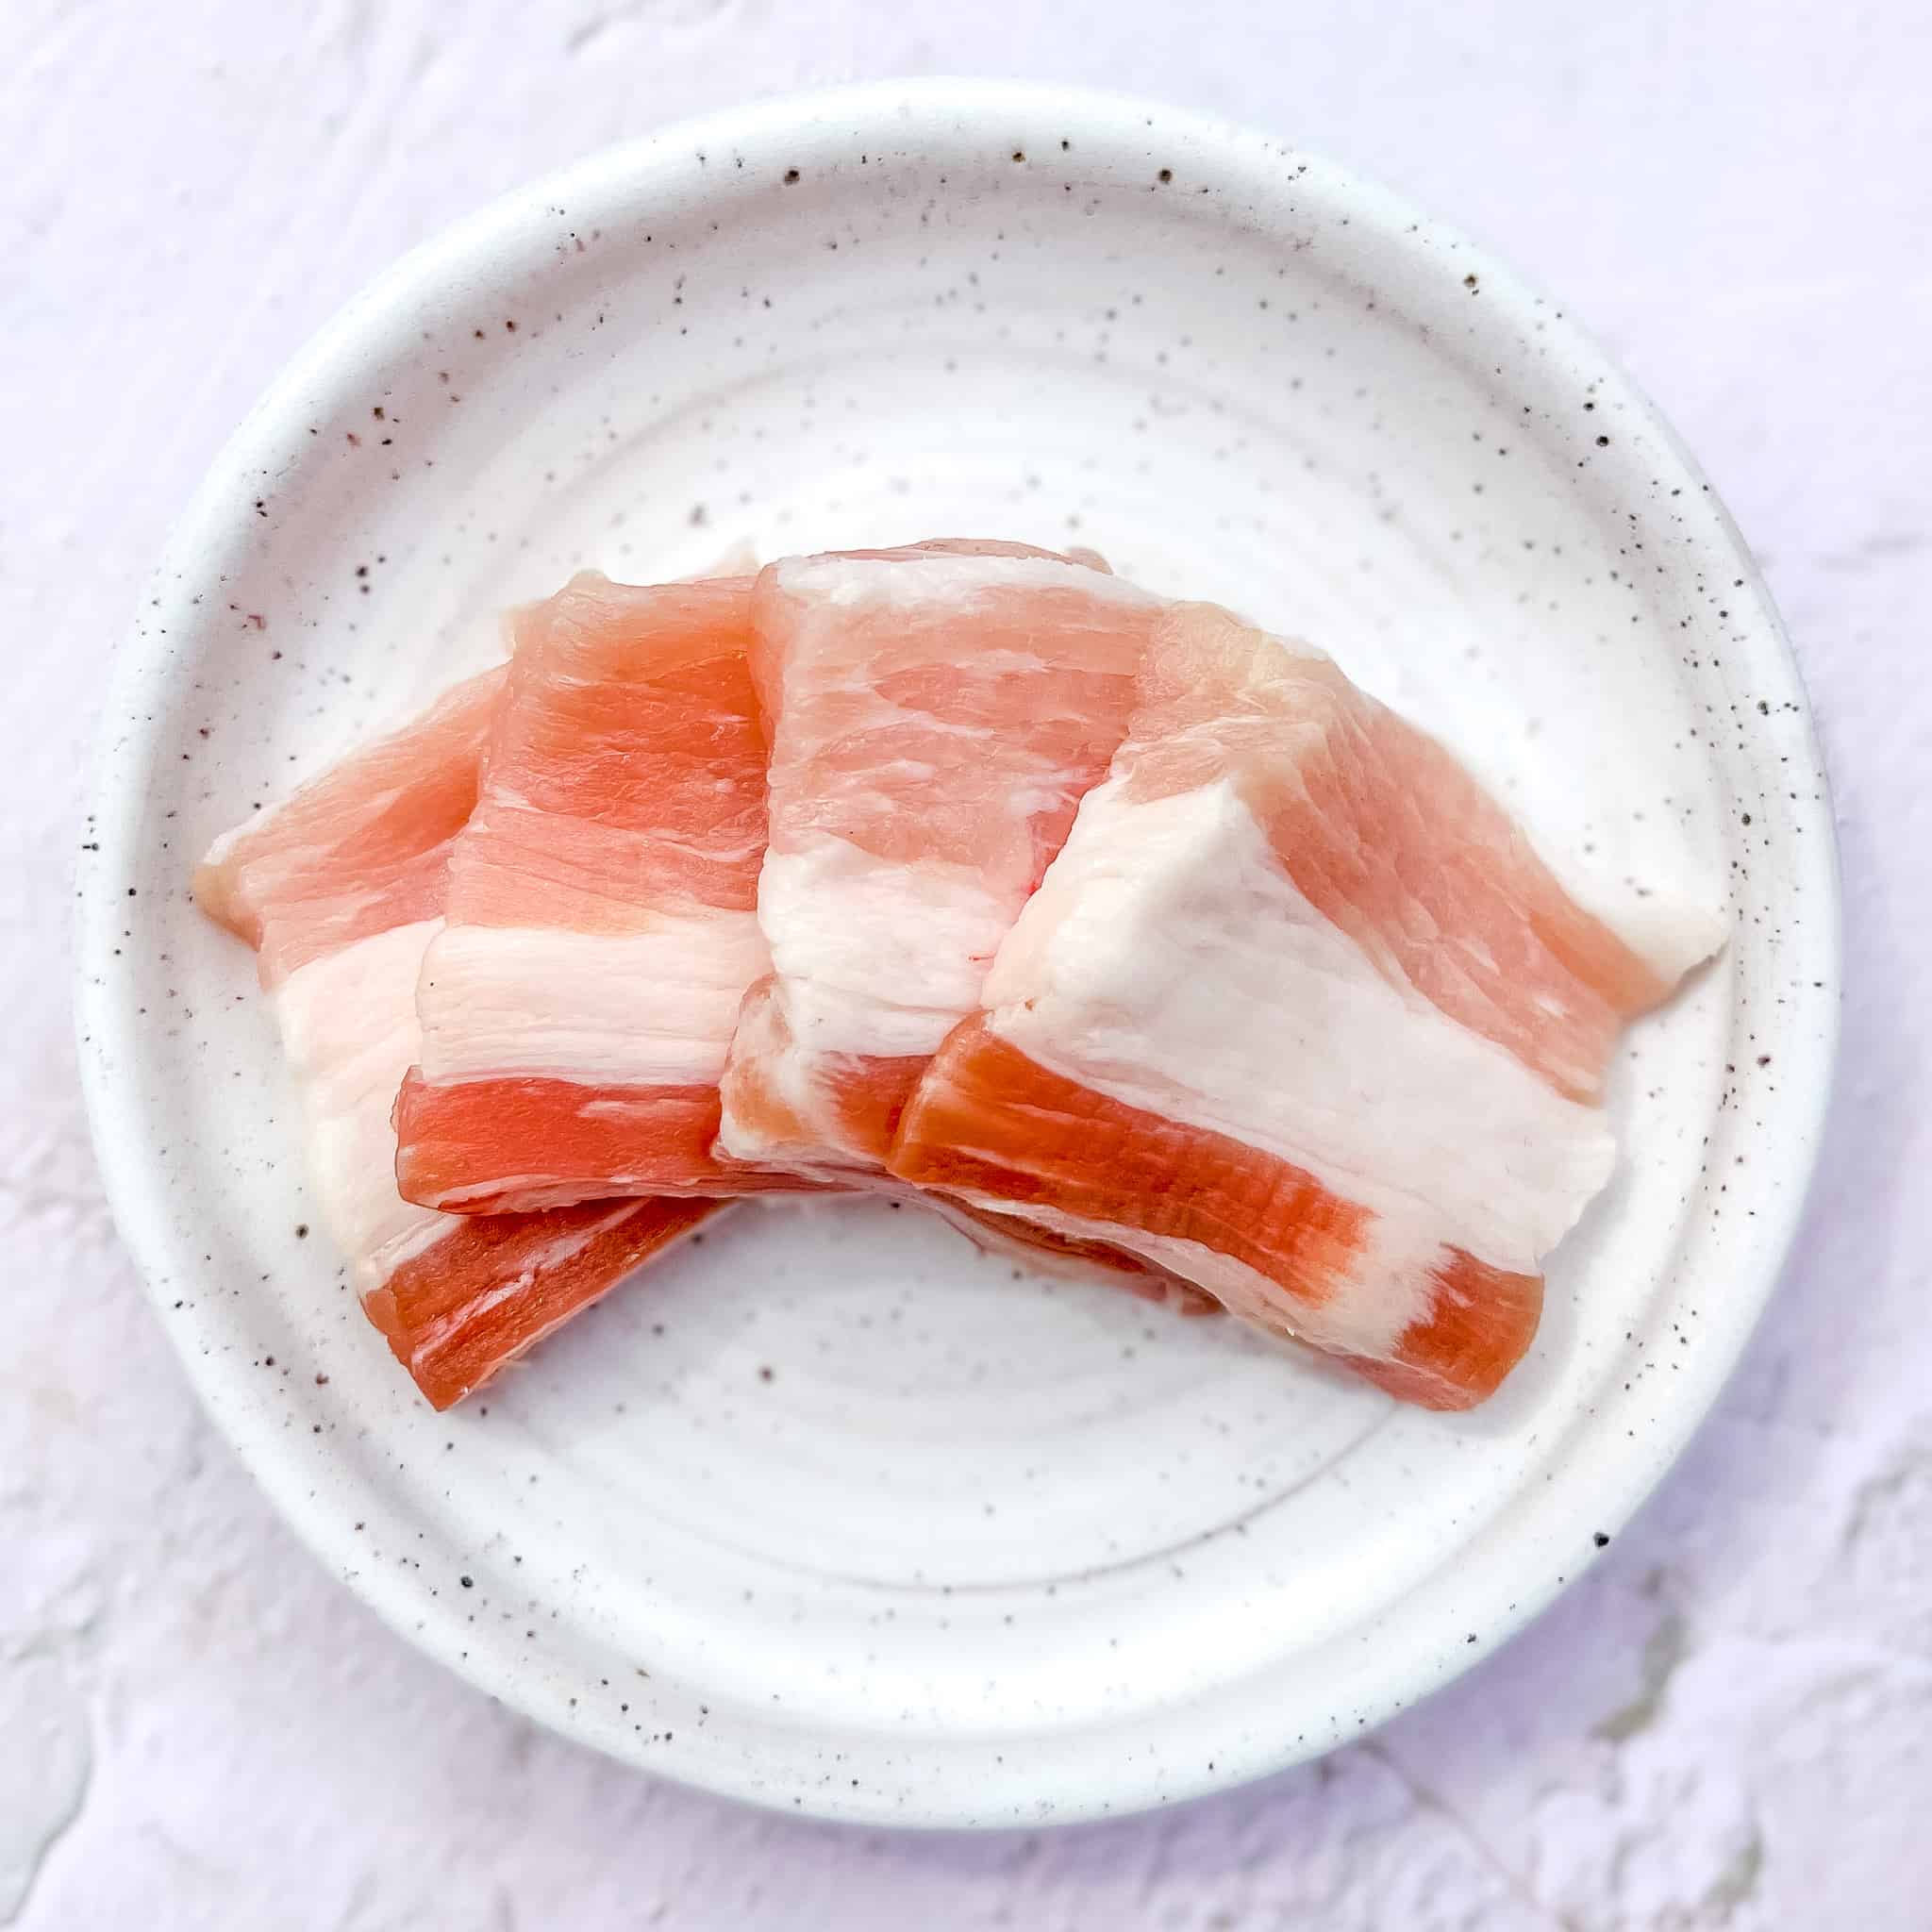 Slices of pork belly on a white plate.